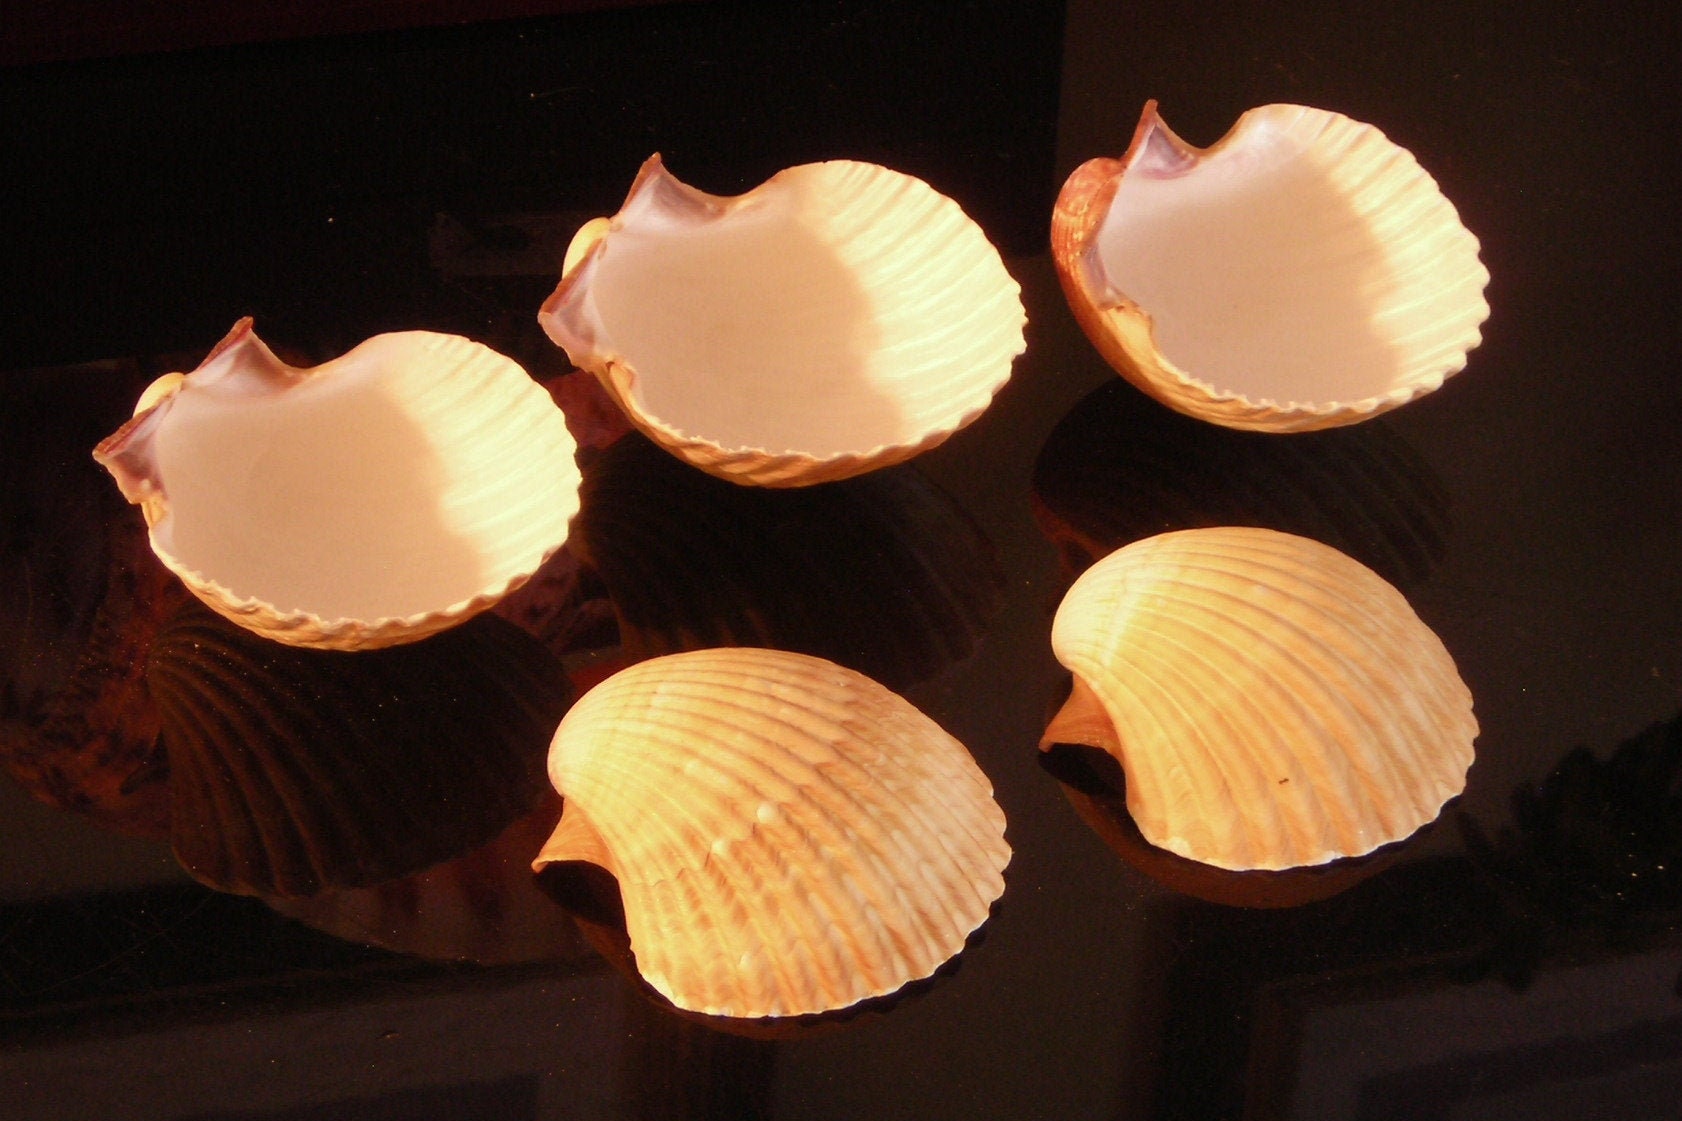 12 Mexican Deep Cup Scallop Shells | 2 1/2 - 3 For Baking, Beach Crafts & Decor"